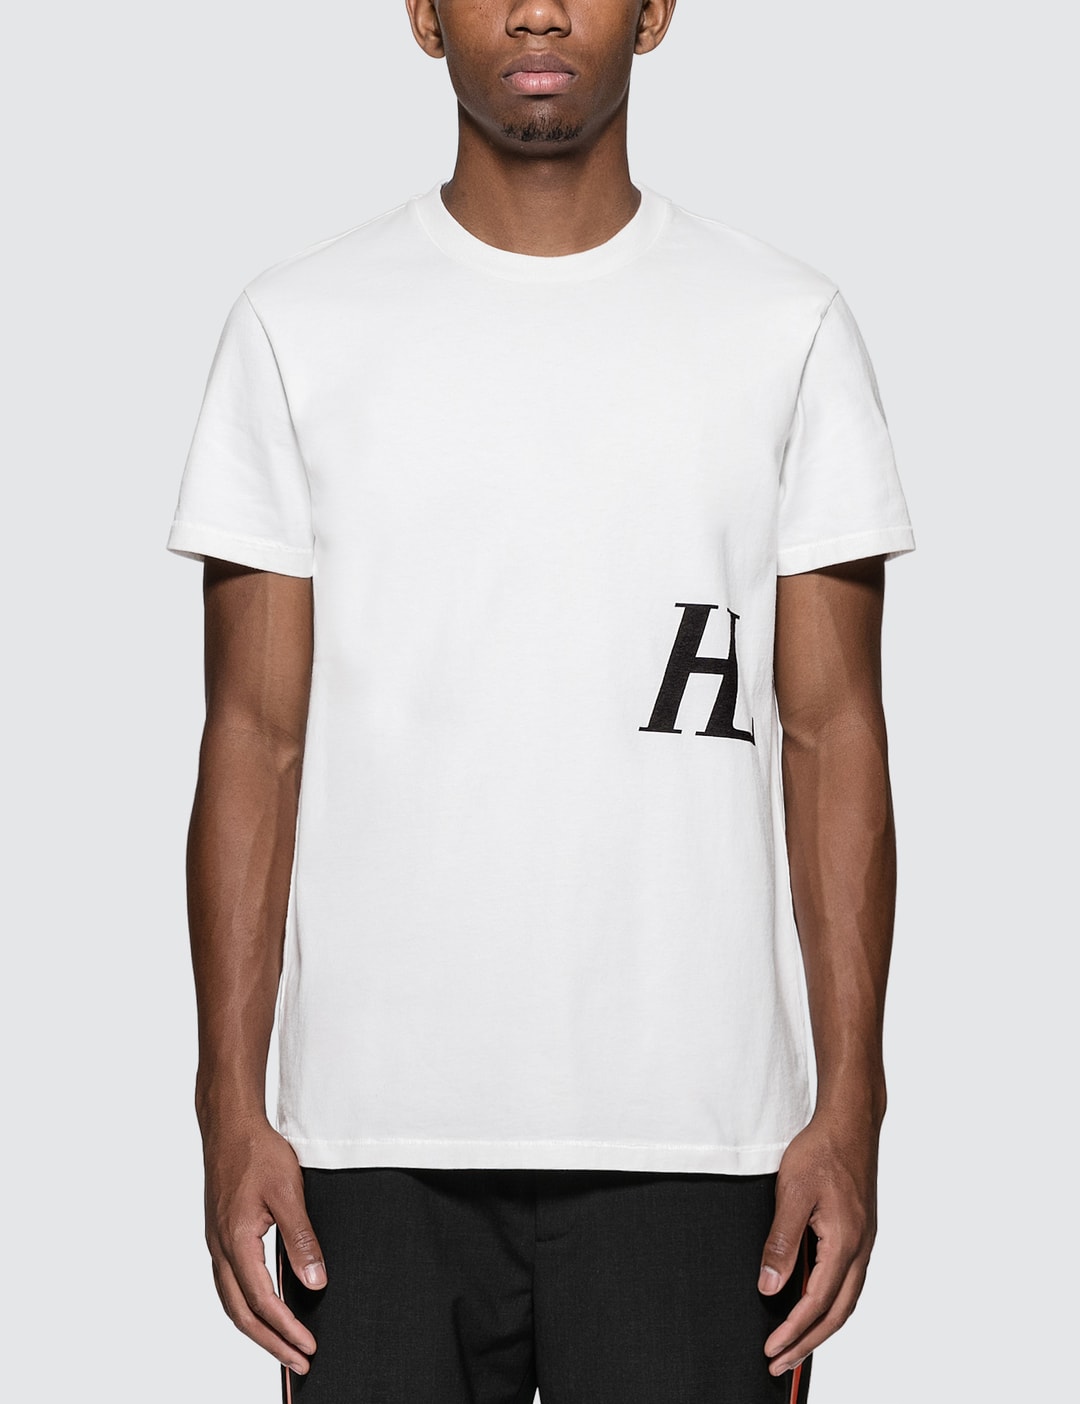 Helmut Lang HL Chest Logo T-Shirt | HBX - Globally Curated Fashion and Lifestyle by Hypebeast